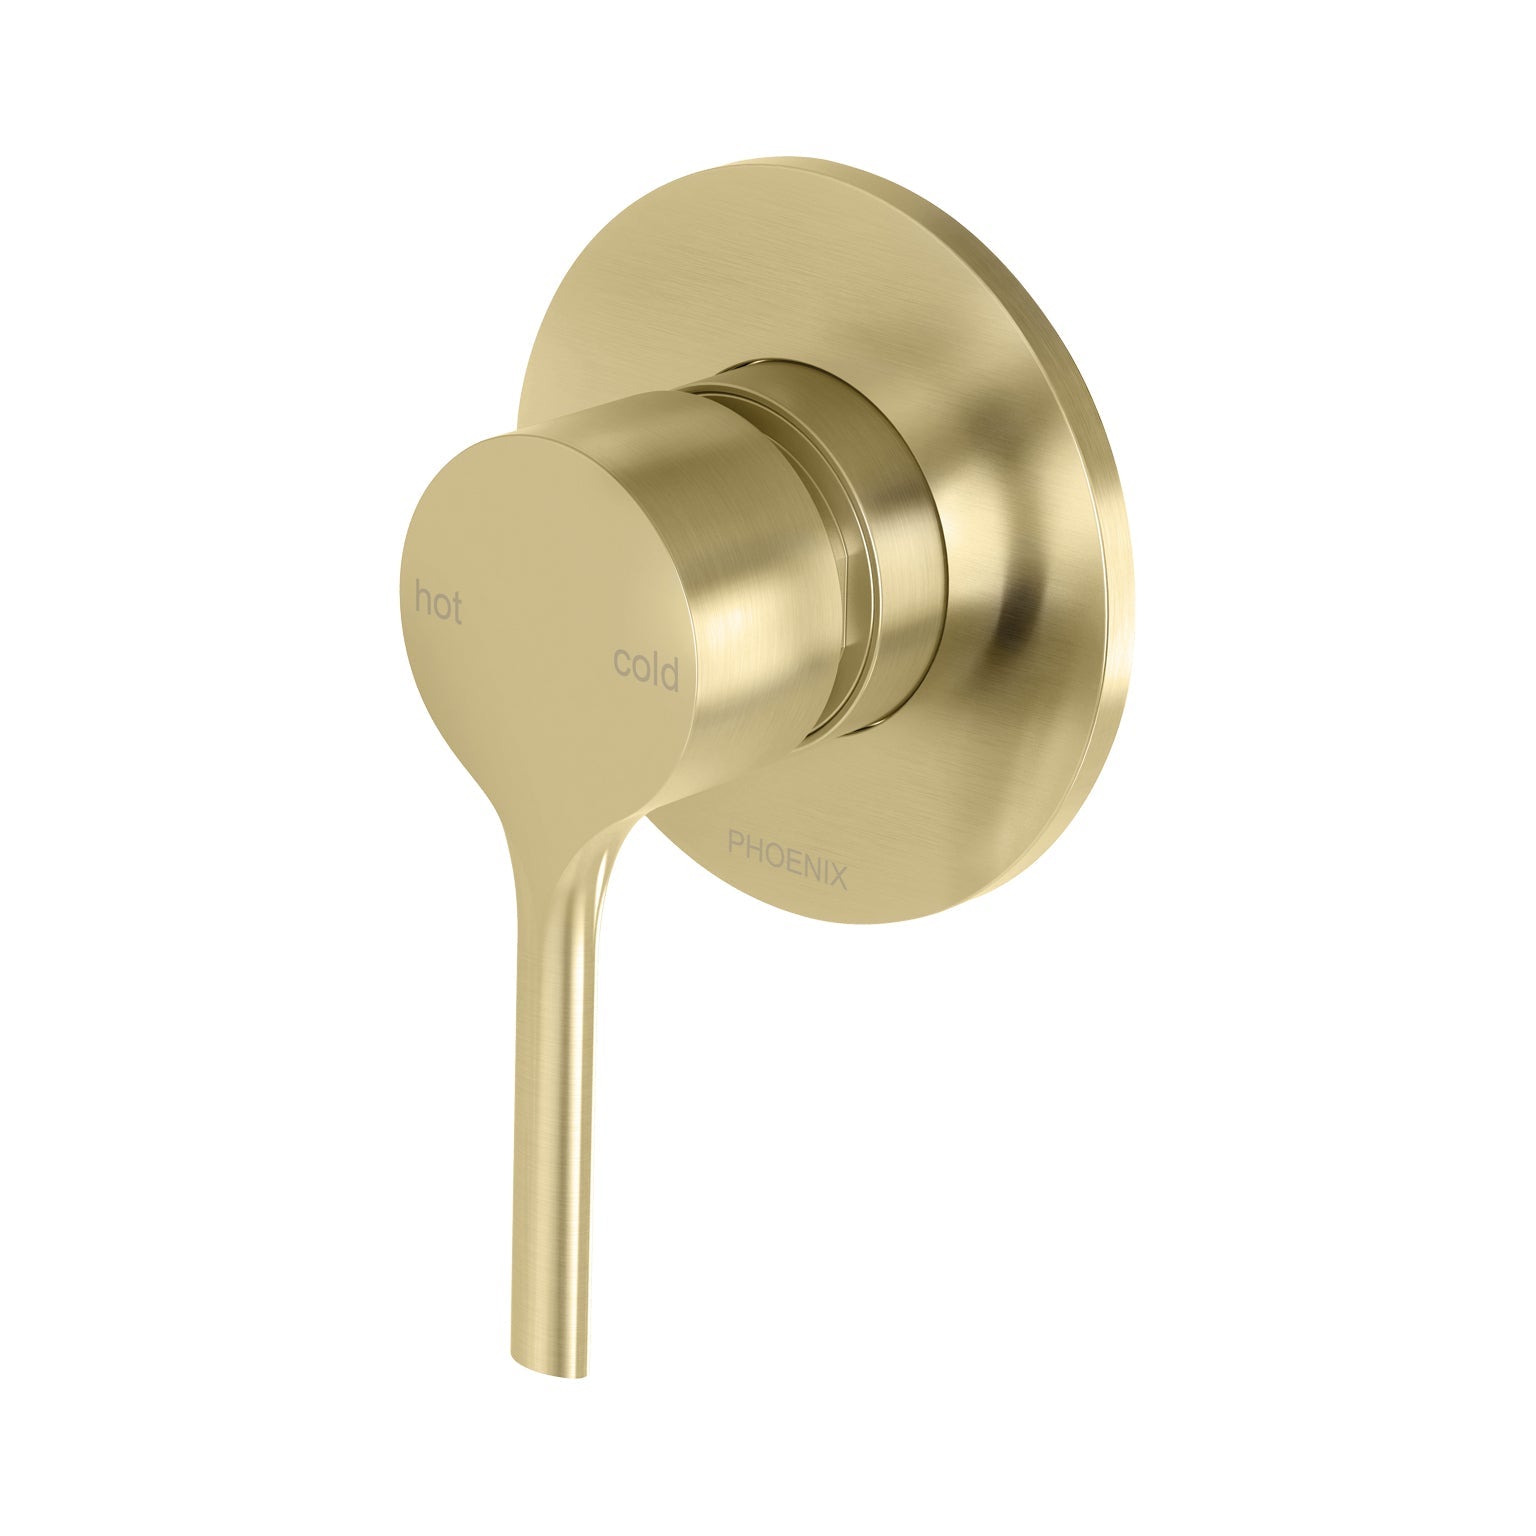 PHOENIX VIVID SLIMLINE OVAL SWITCHMIX SHOWER / WALL MIXER FIT-OFF AND ROUGH-IN KIT BRUSHED GOLD